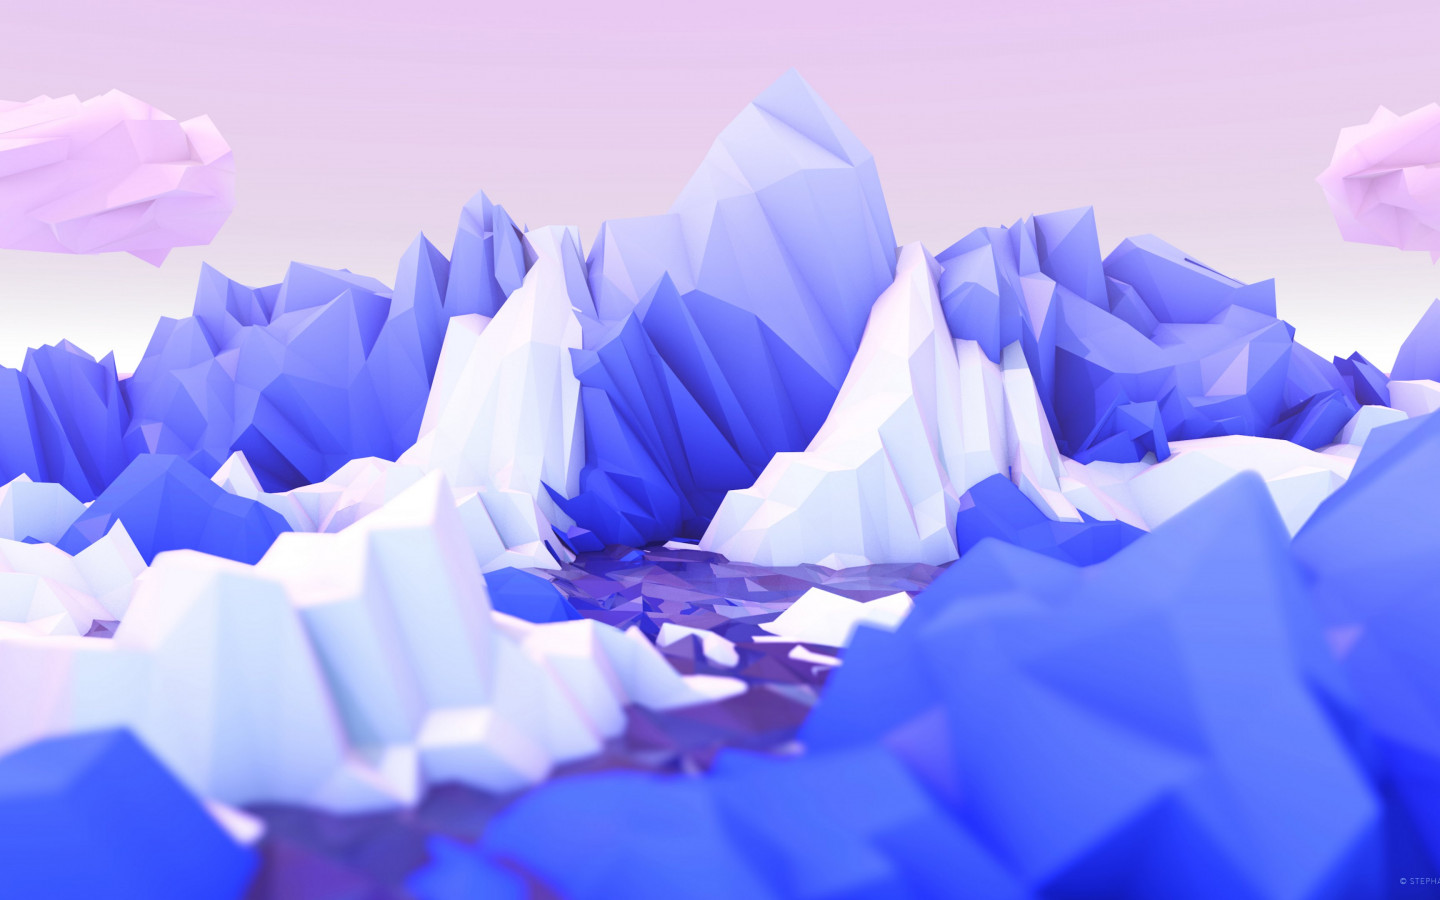 Low poly graphic design wallpaper 1440x900